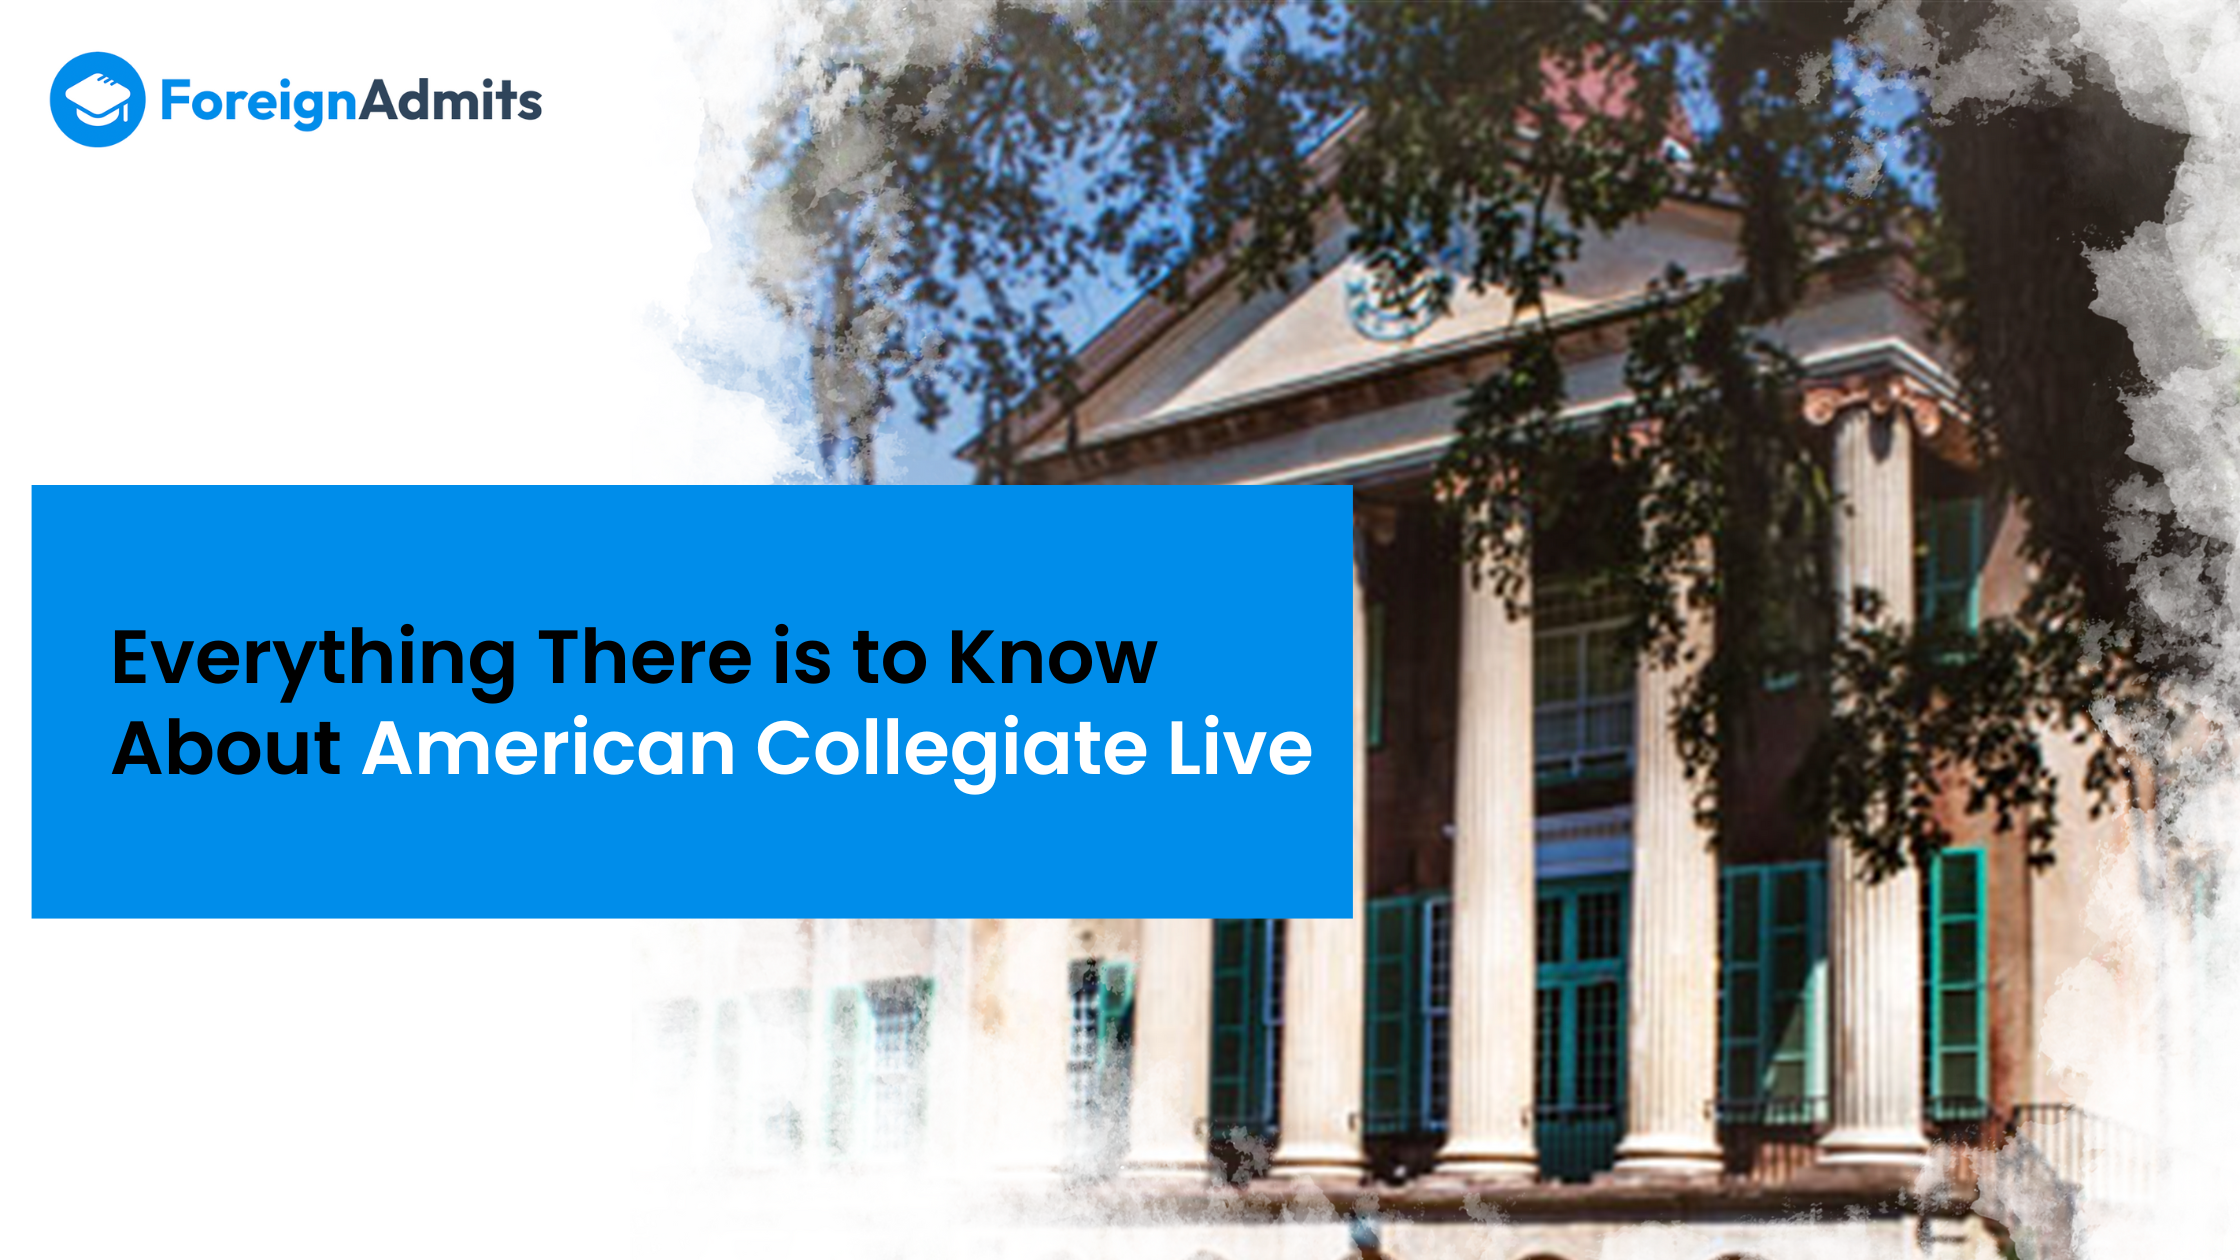 Everything There is to Know About American Collegiate Live